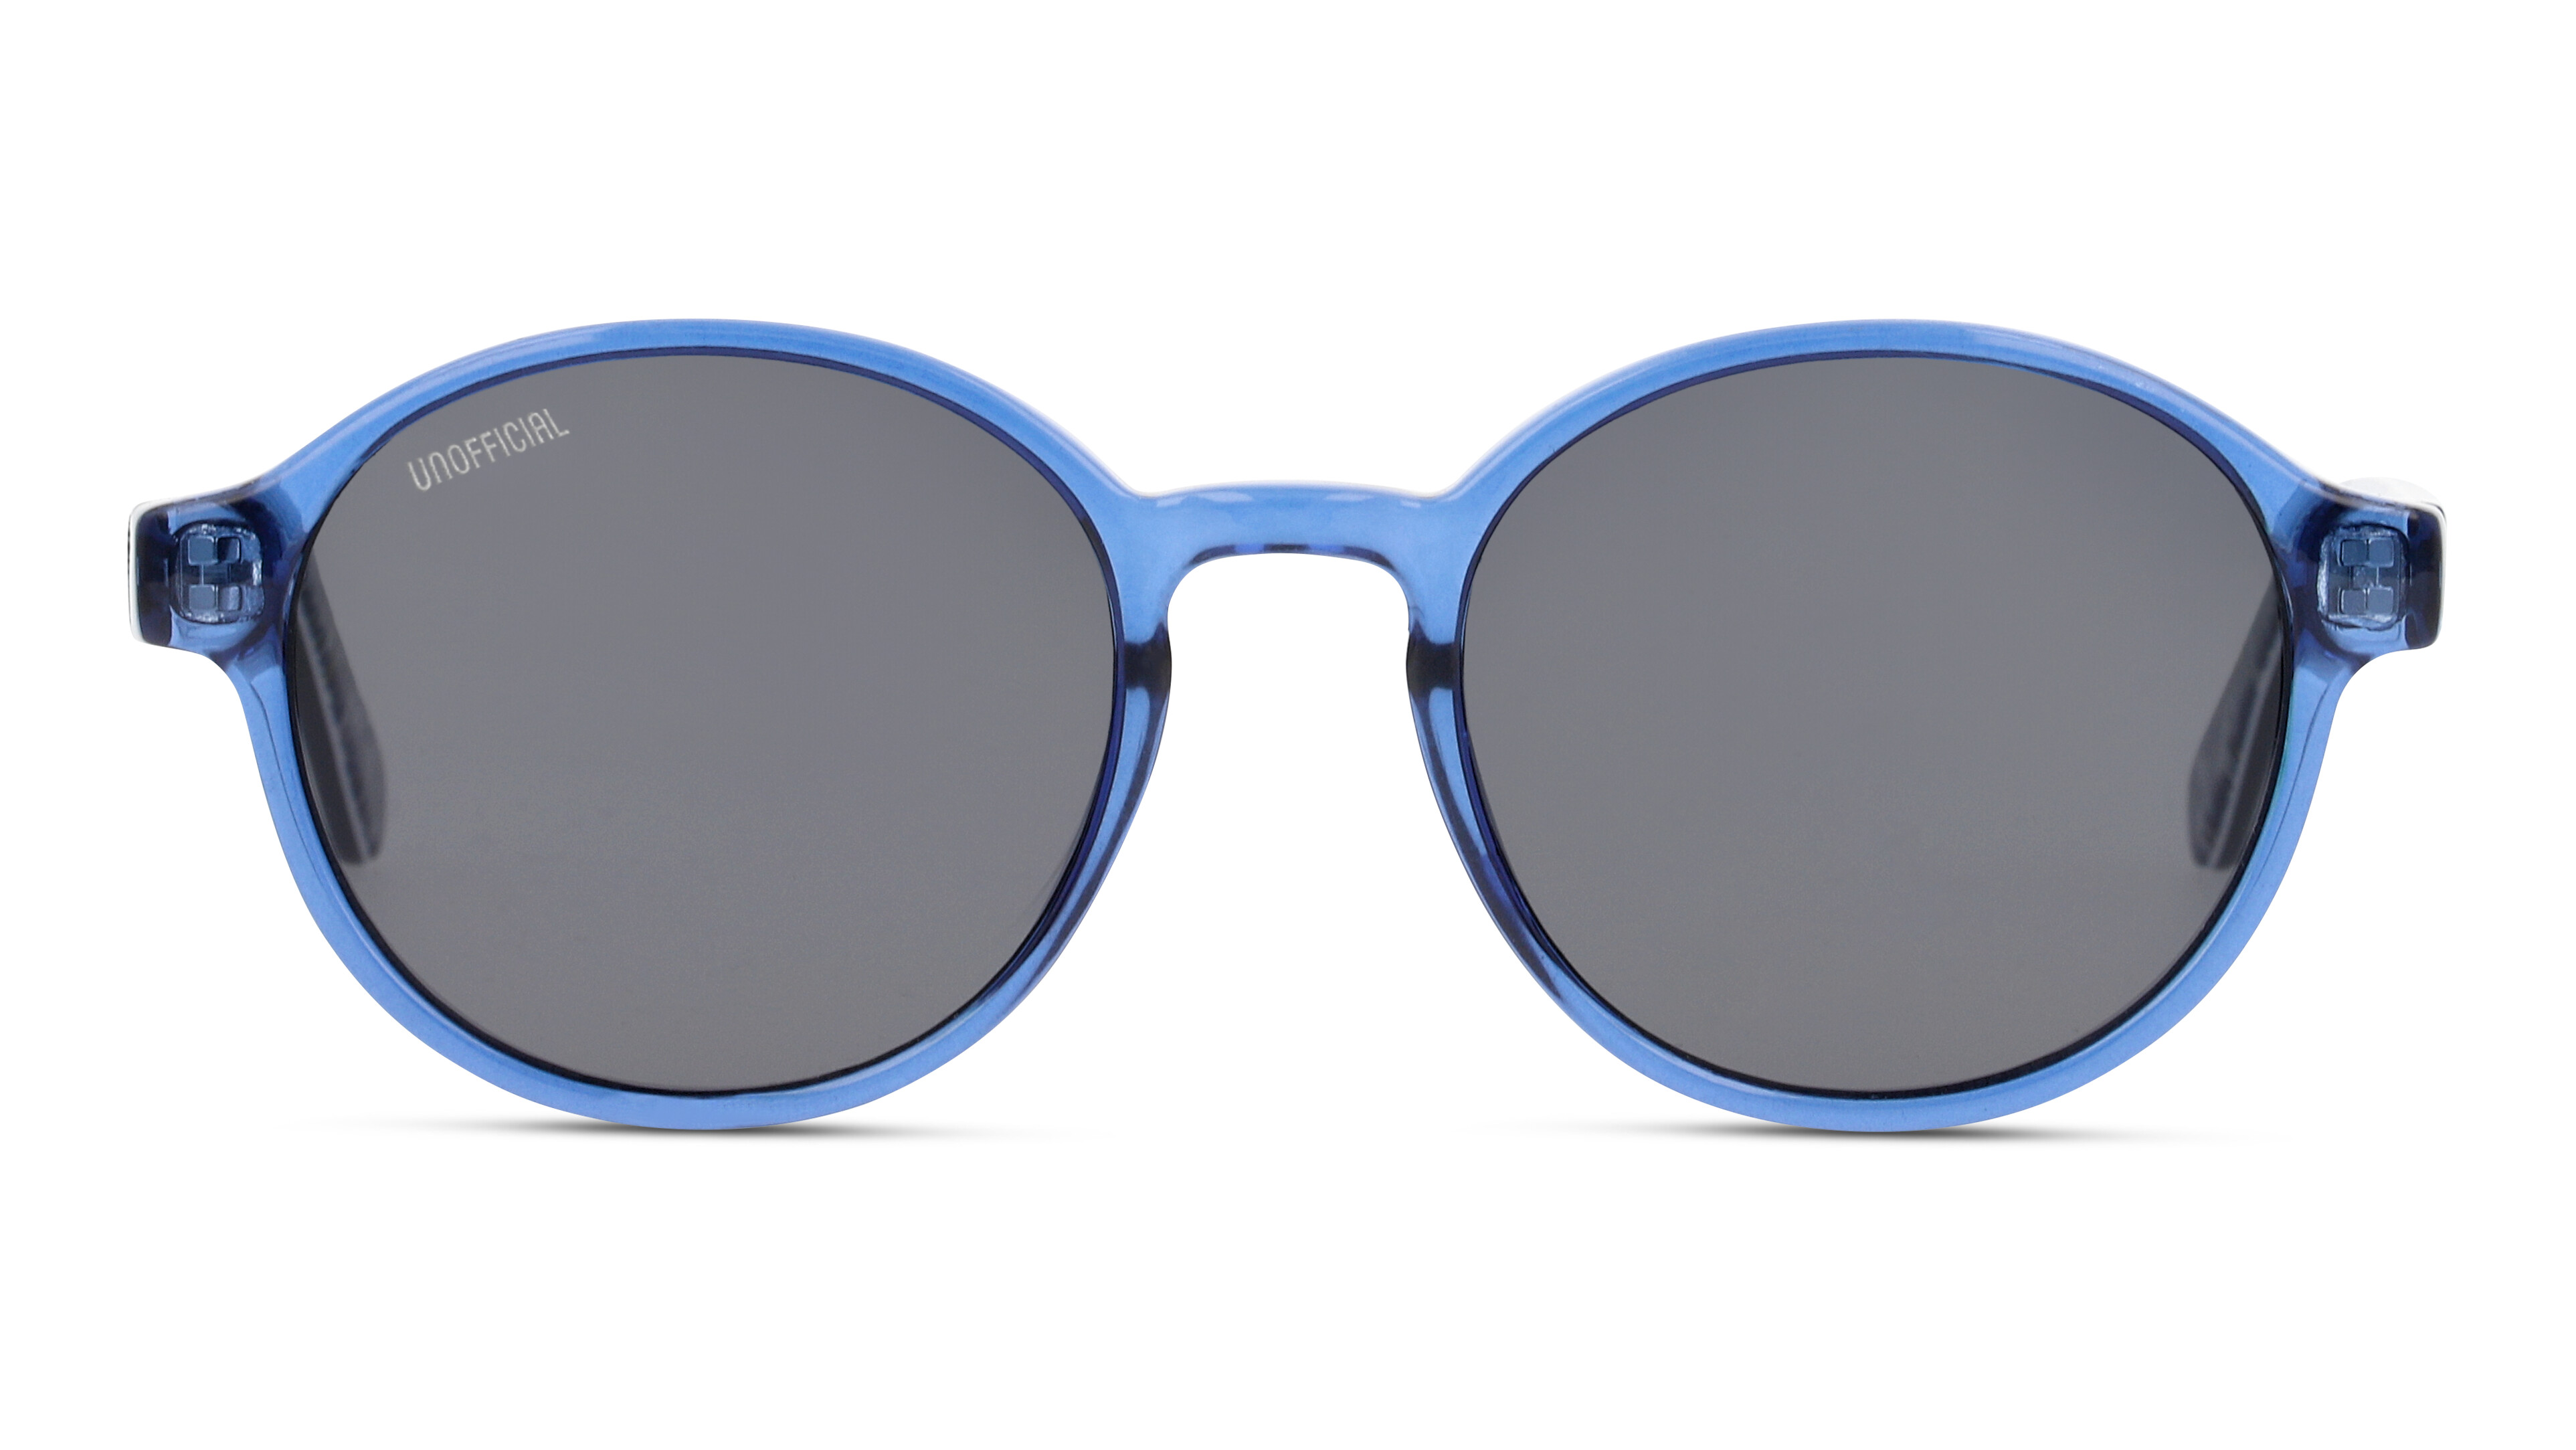 [products.image.front] UNOFFICIAL UNSK5001 LCG0 Sonnenbrille